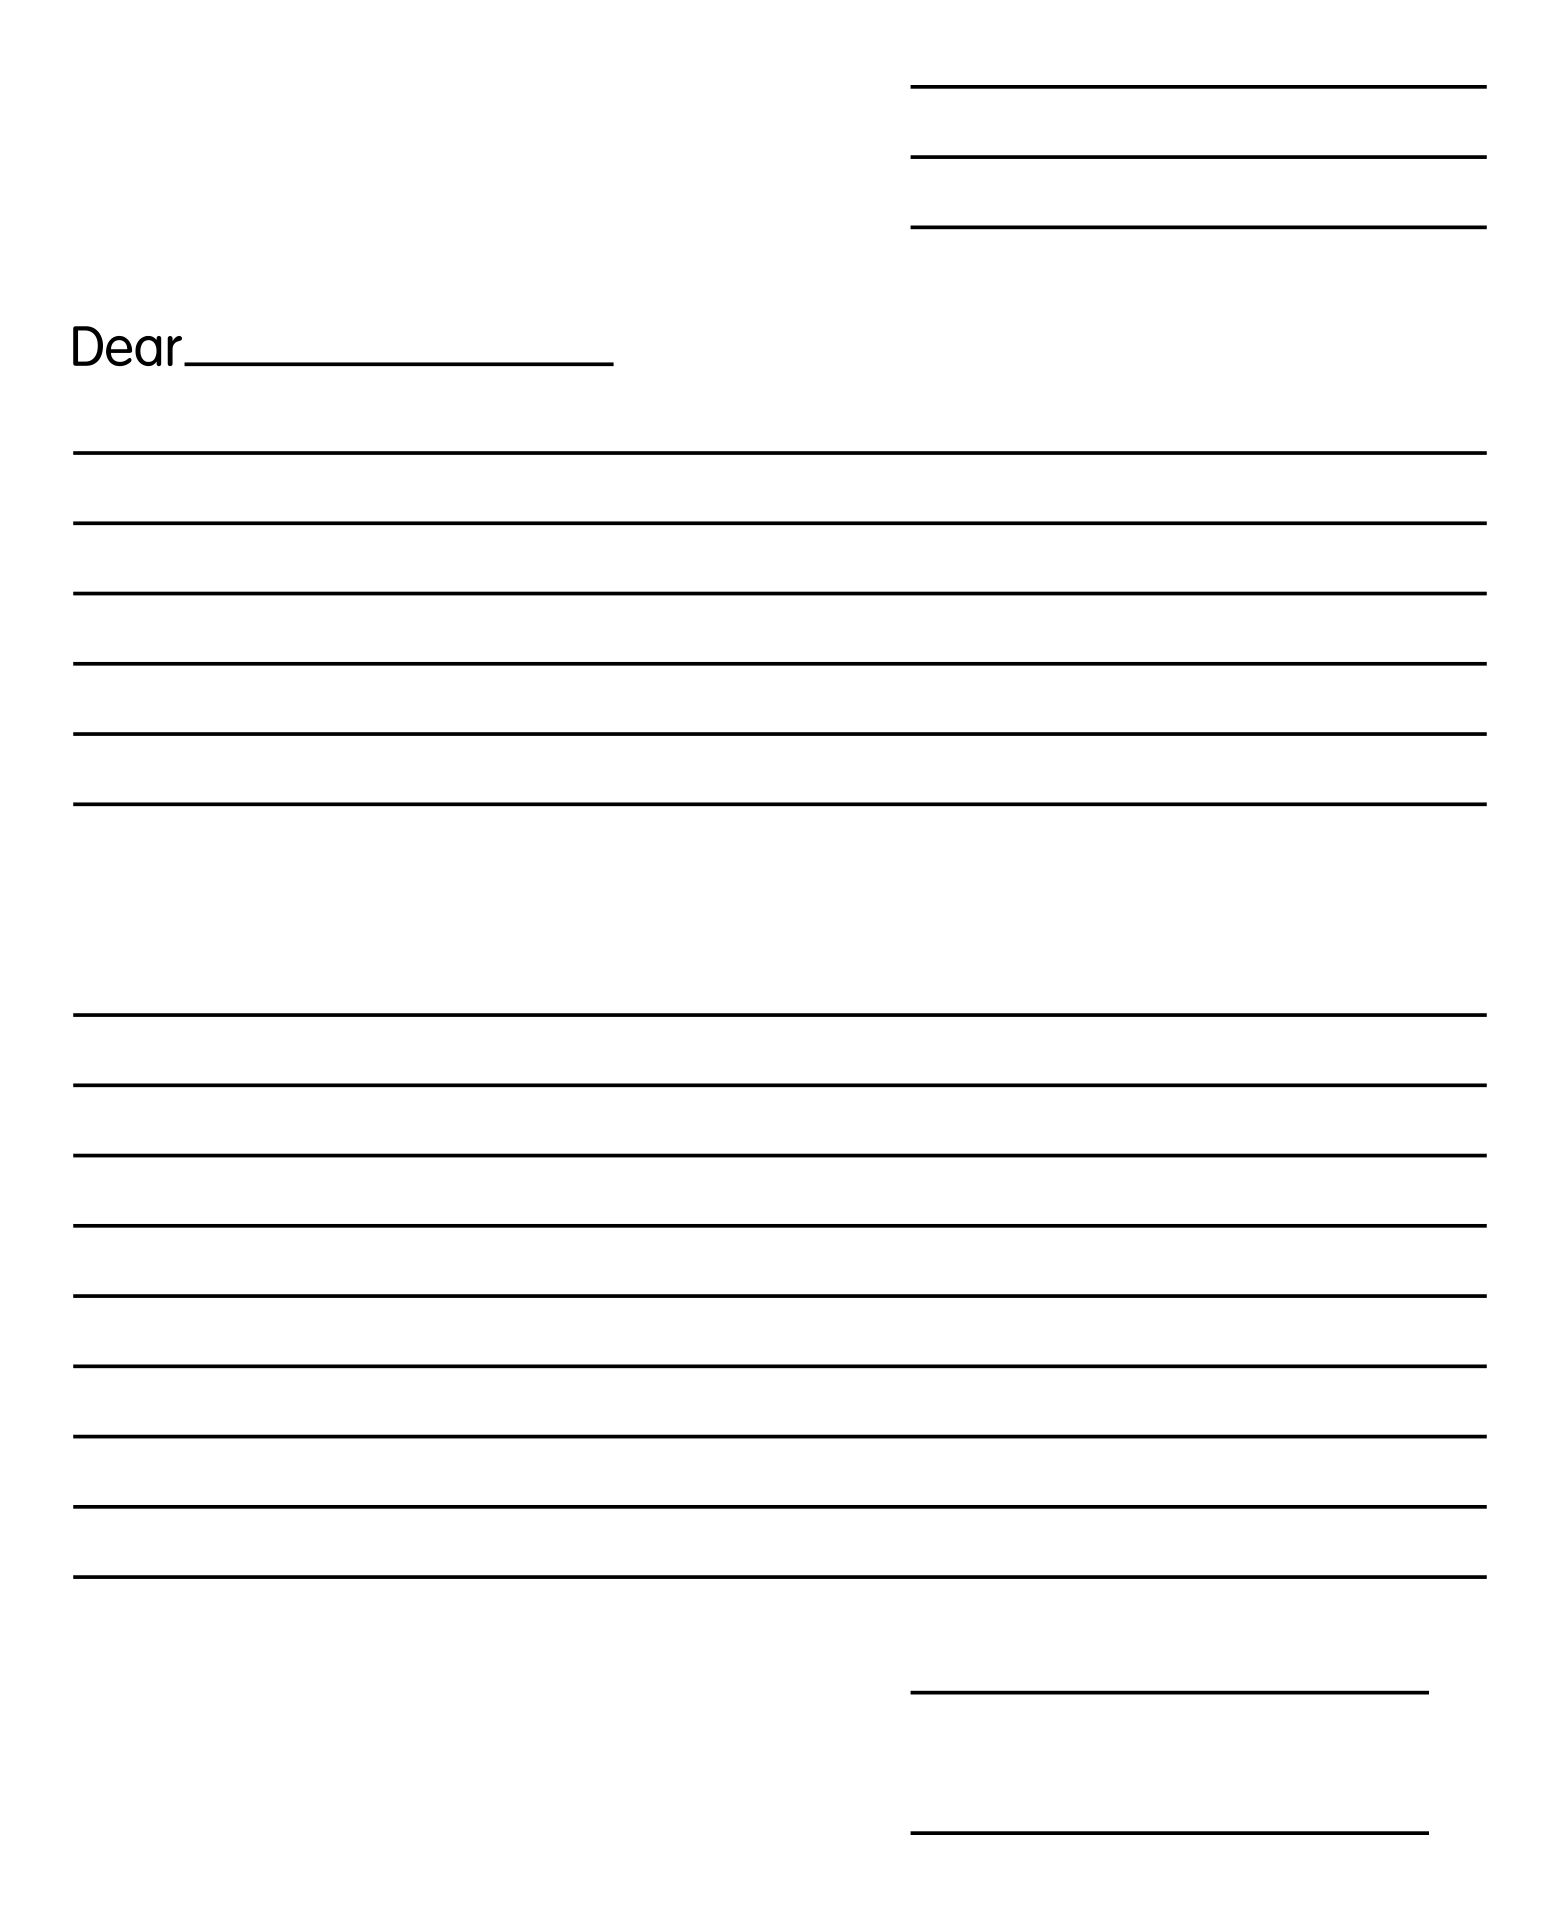 printable-friendly-letter-form-printable-forms-free-online